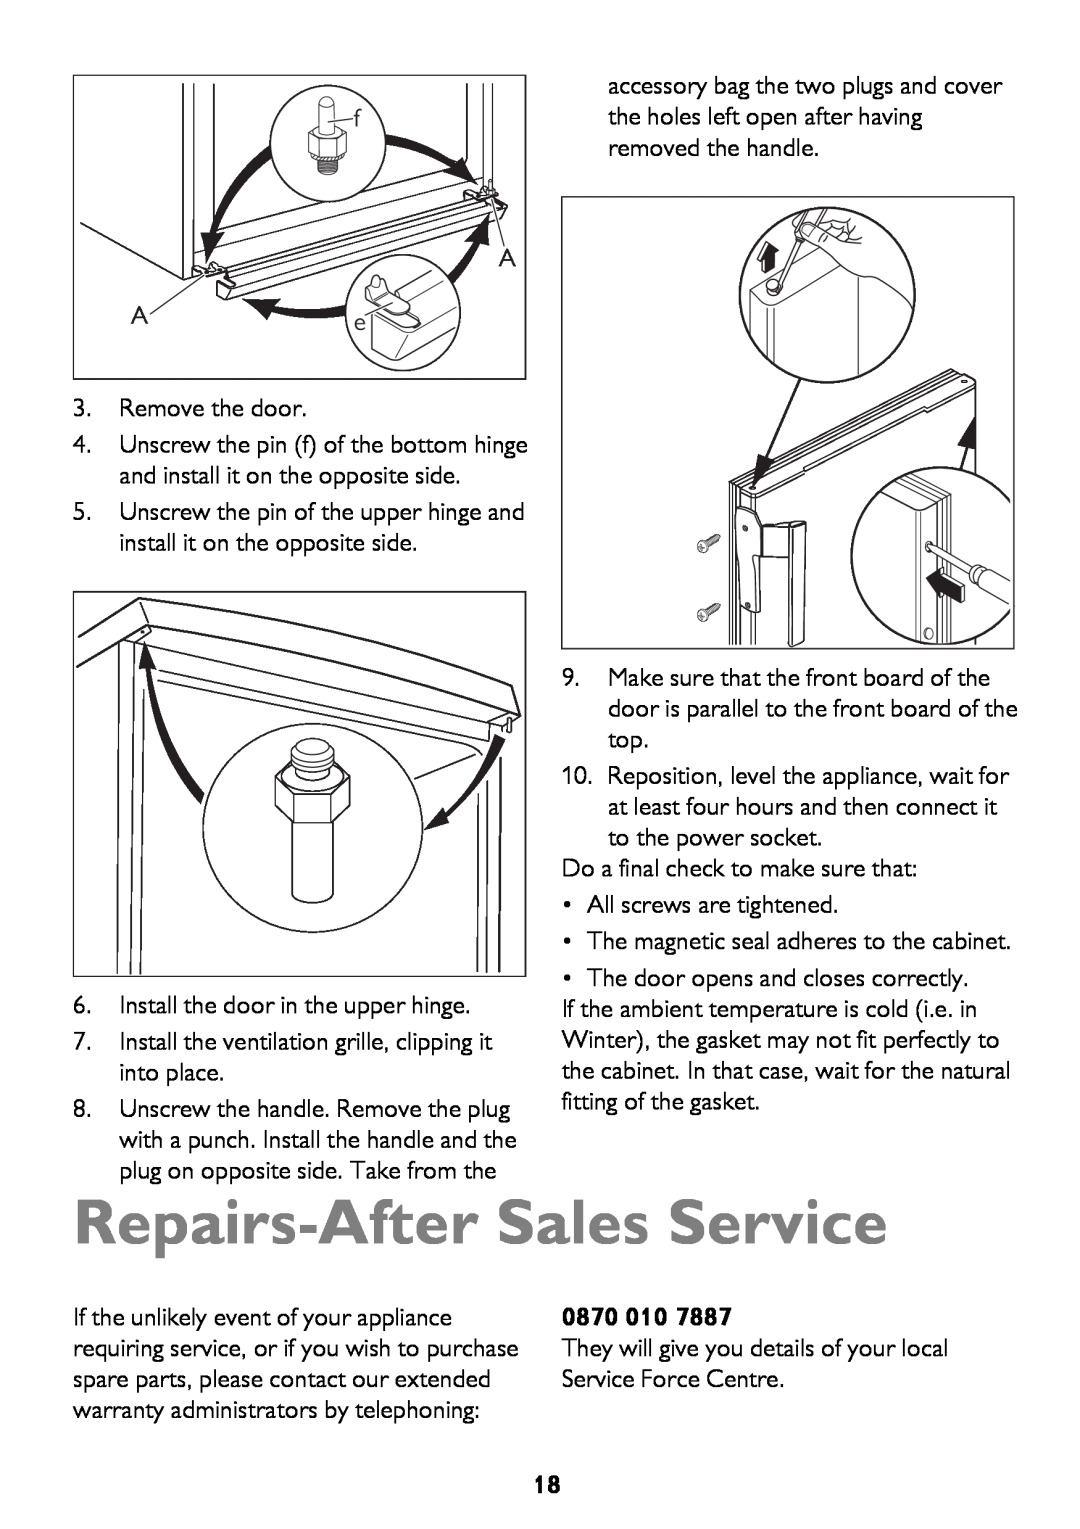 John Lewis JLFZW1601 instruction manual Repairs-After Sales Service, 0870 